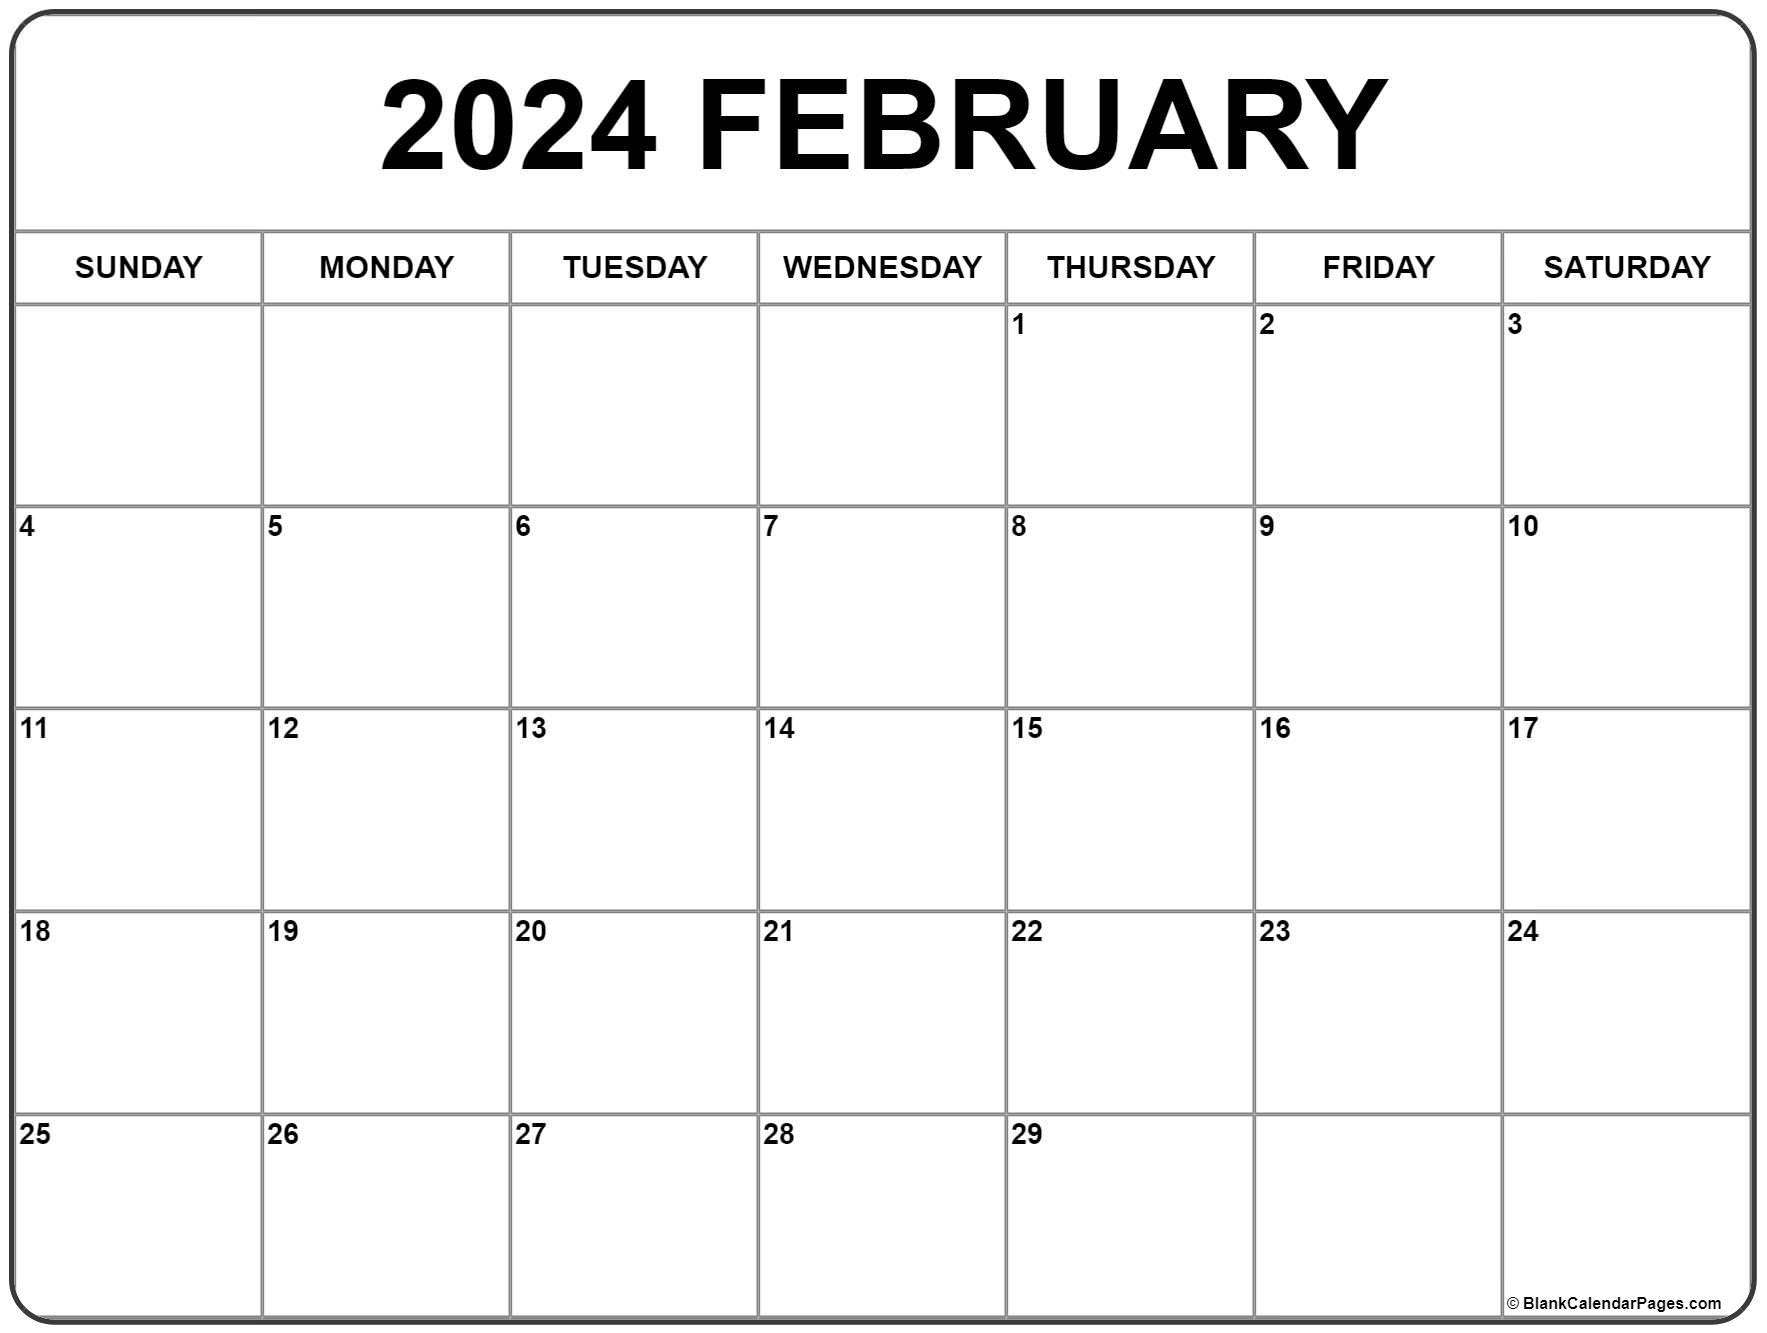 February 2021 Calendar Free Printable Calendar Calendars in weekly & monthly layouts. https blankcalendarpages com february 2021 calendar